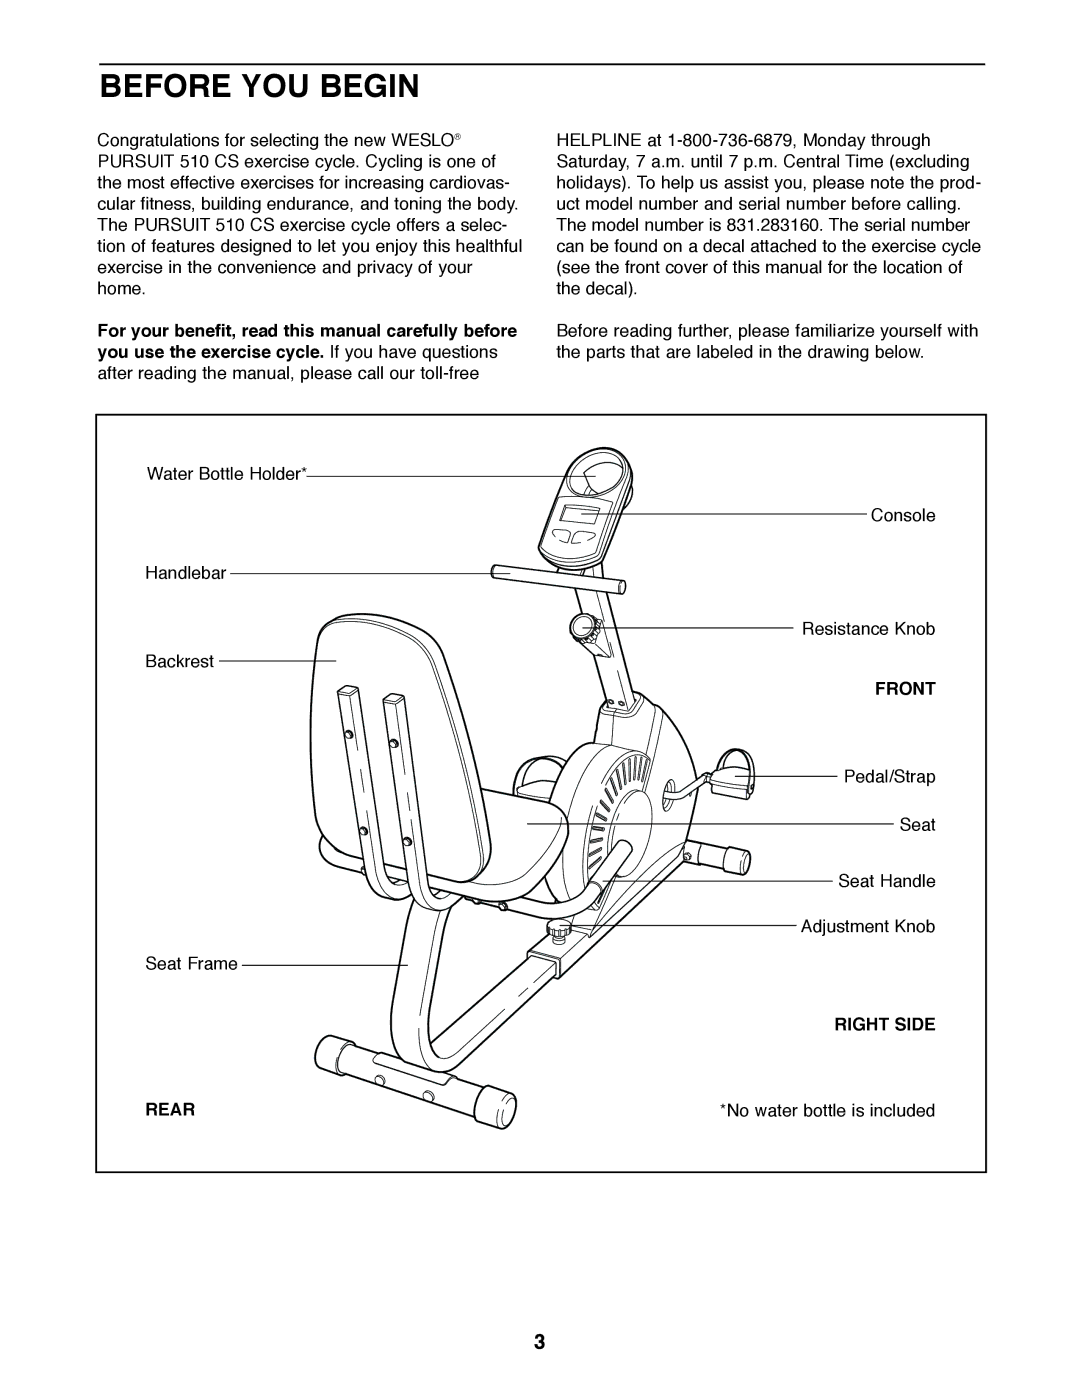 Weslo 831.283160 user manual Before YOU Begin, Front, Right Side, Rear 